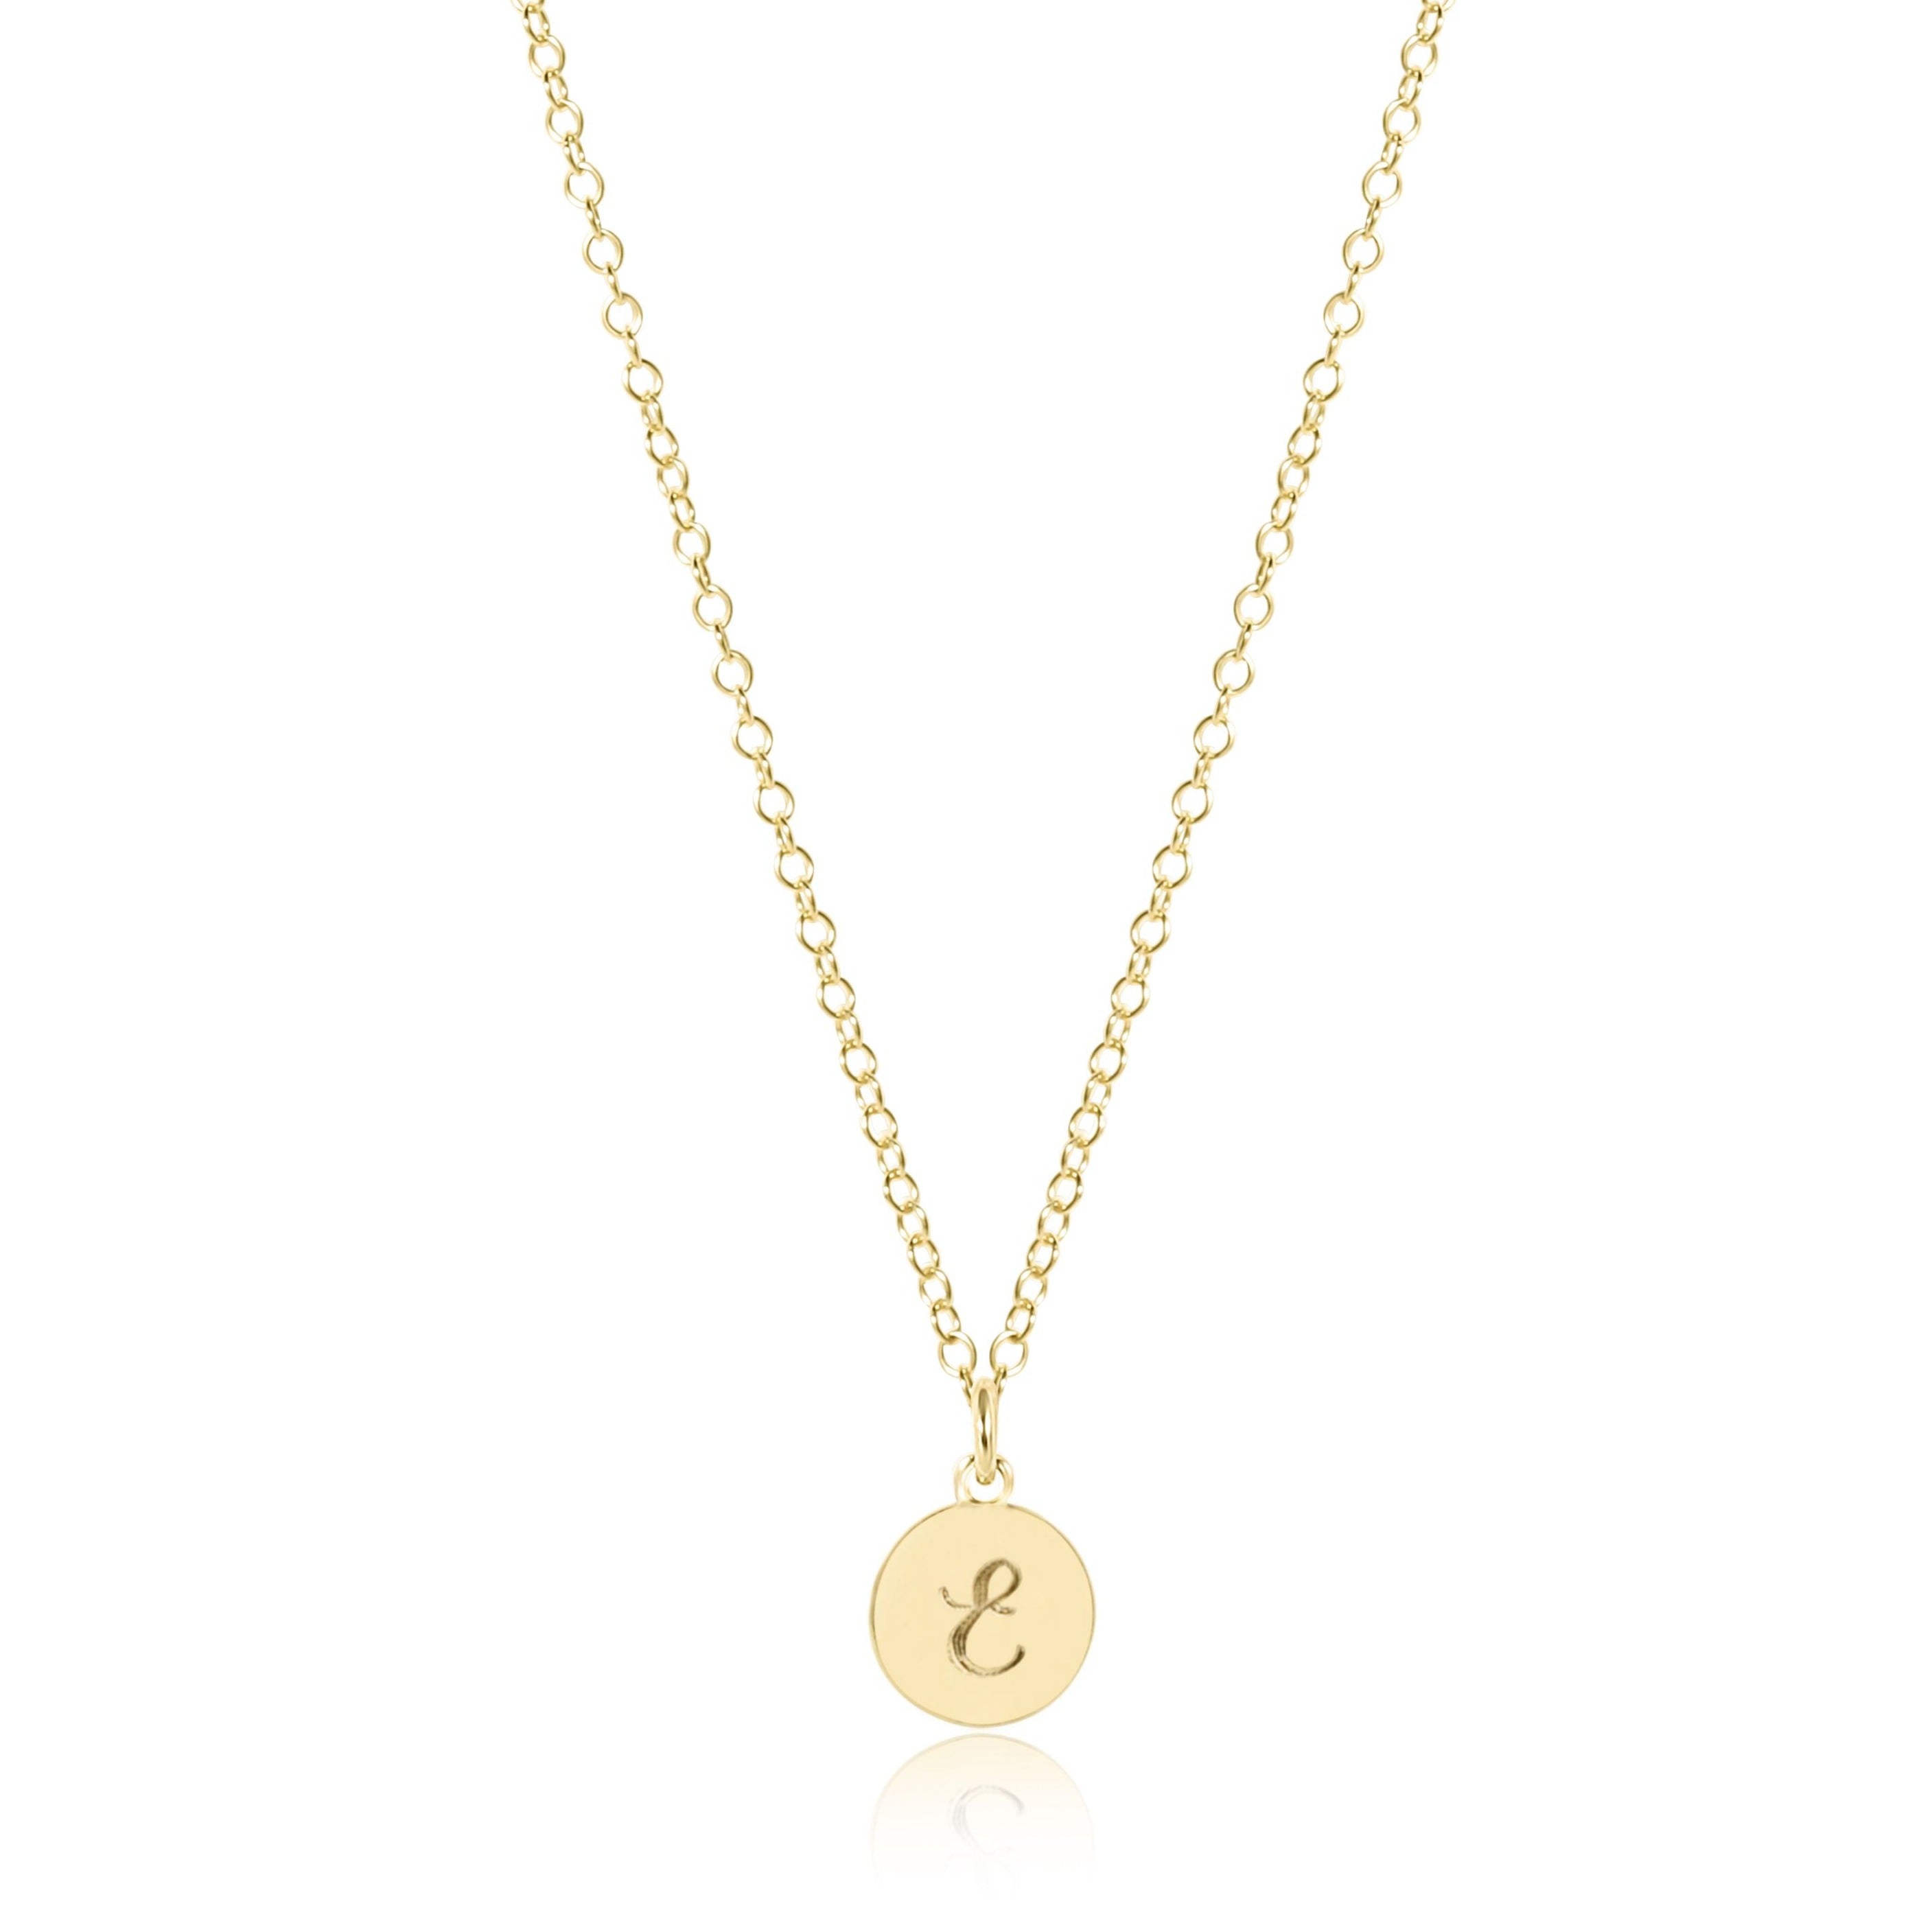 Respect Small Disc Initial Necklace, 16"